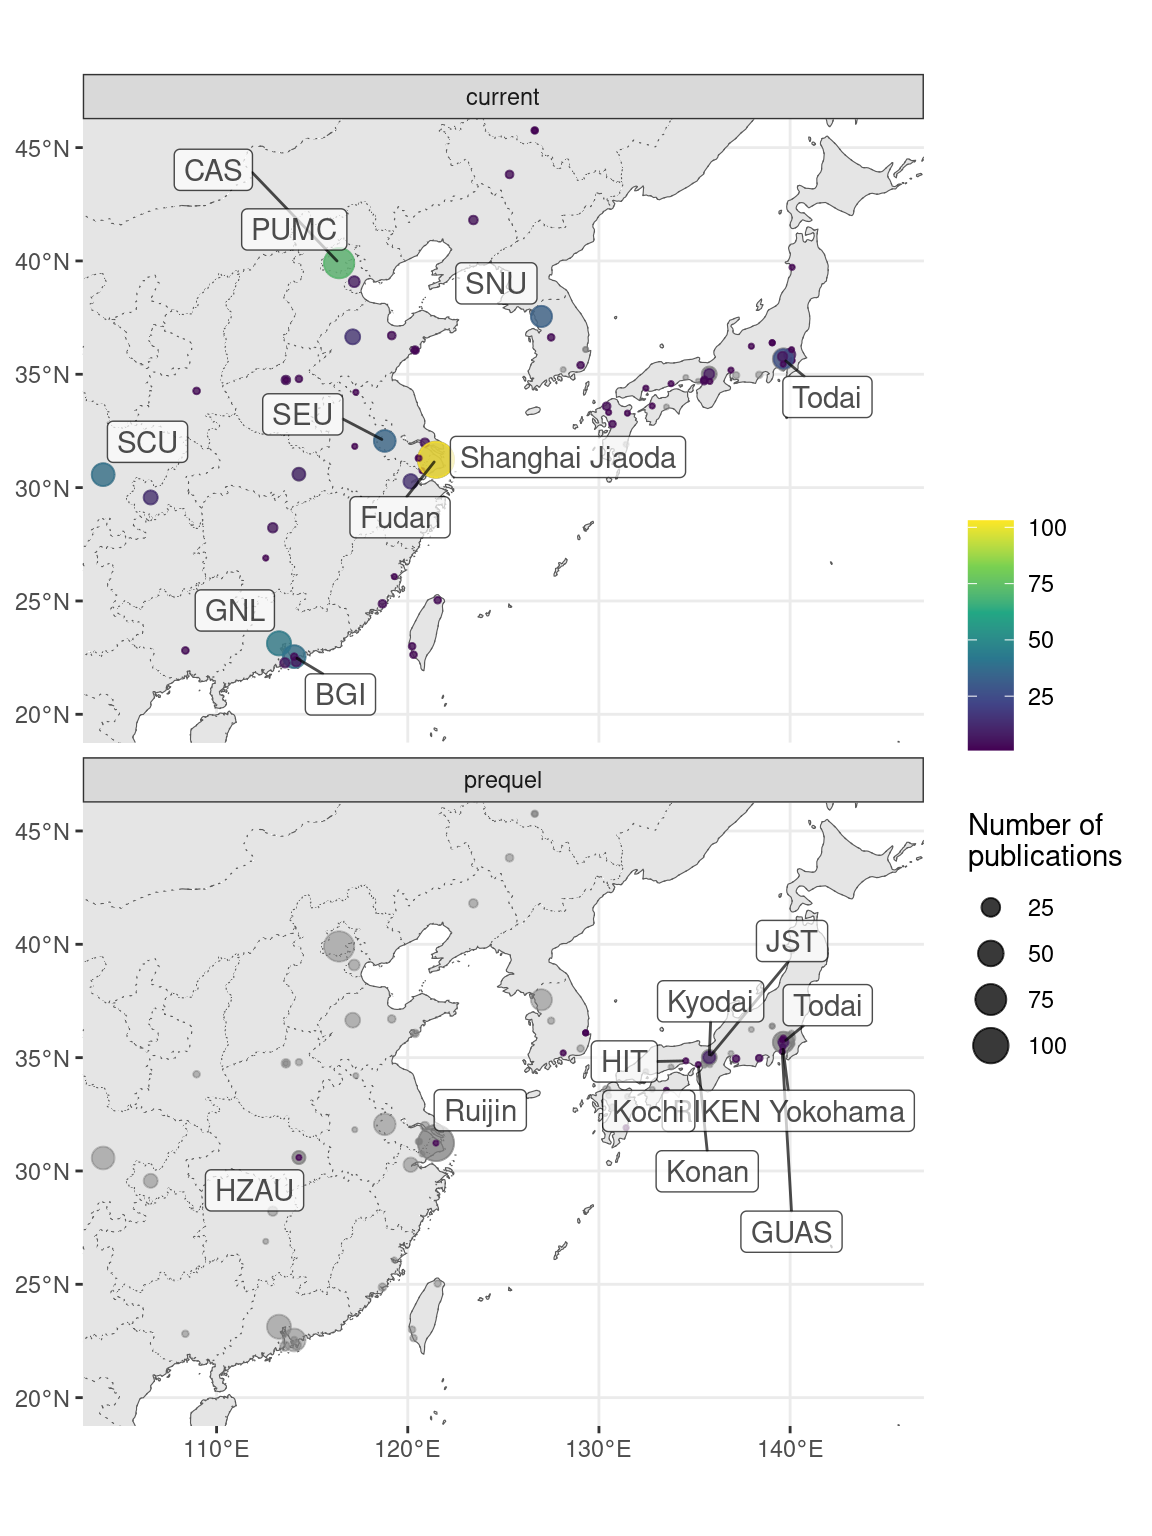 Map of institutions in northeast Asia. Area of the point is proportional to the number of publications from that city. Gray points are sum of both prequel and current eras for each city. Top 10 institutions in each era are labeled.